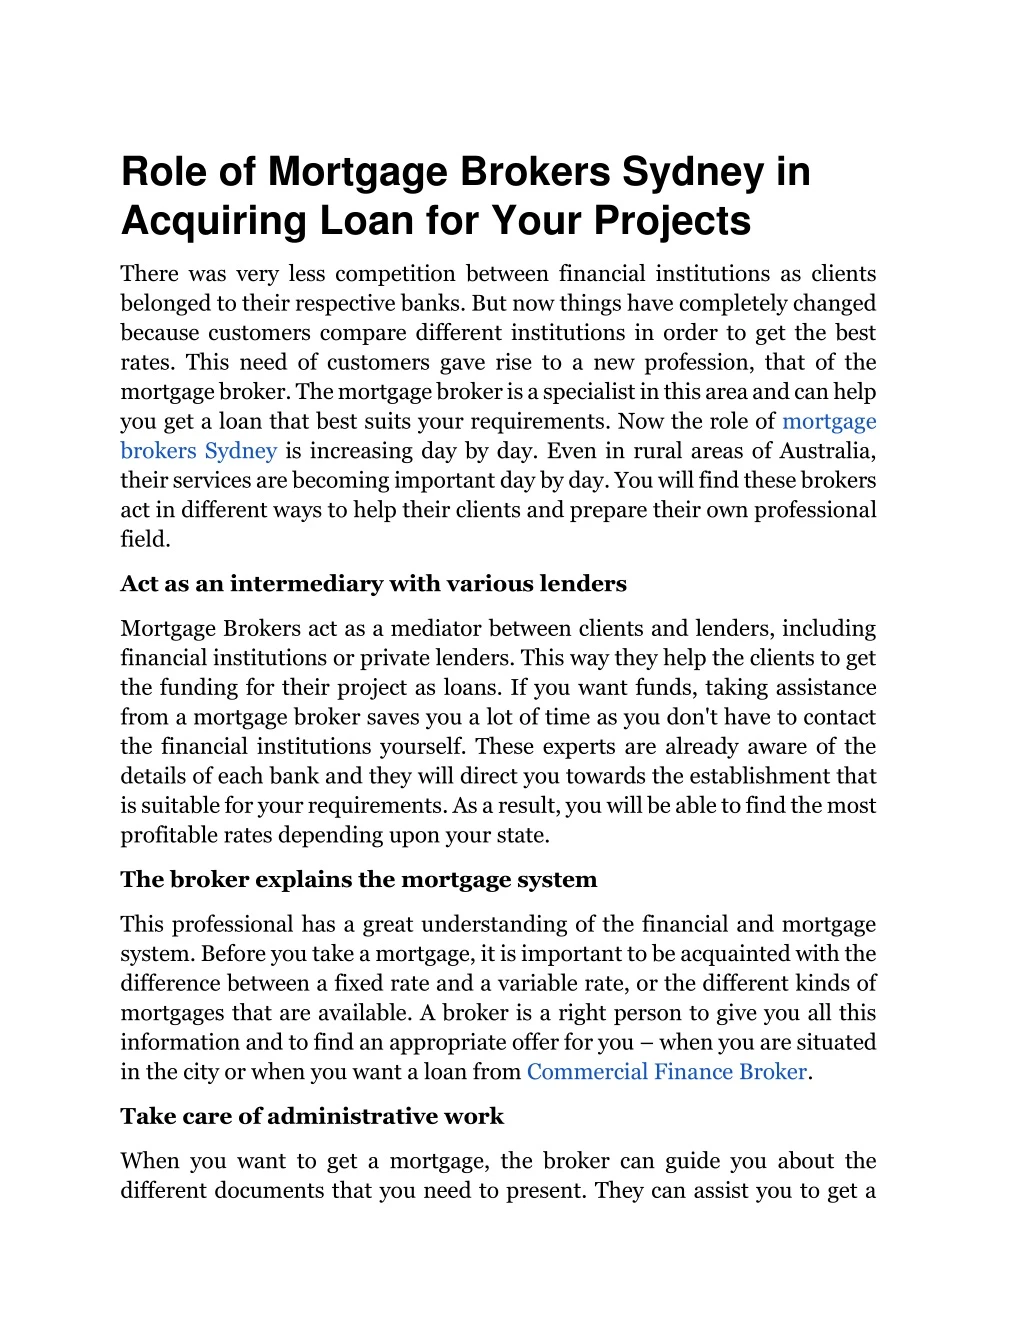 role of mortgage brokers sydney in acquiring loan